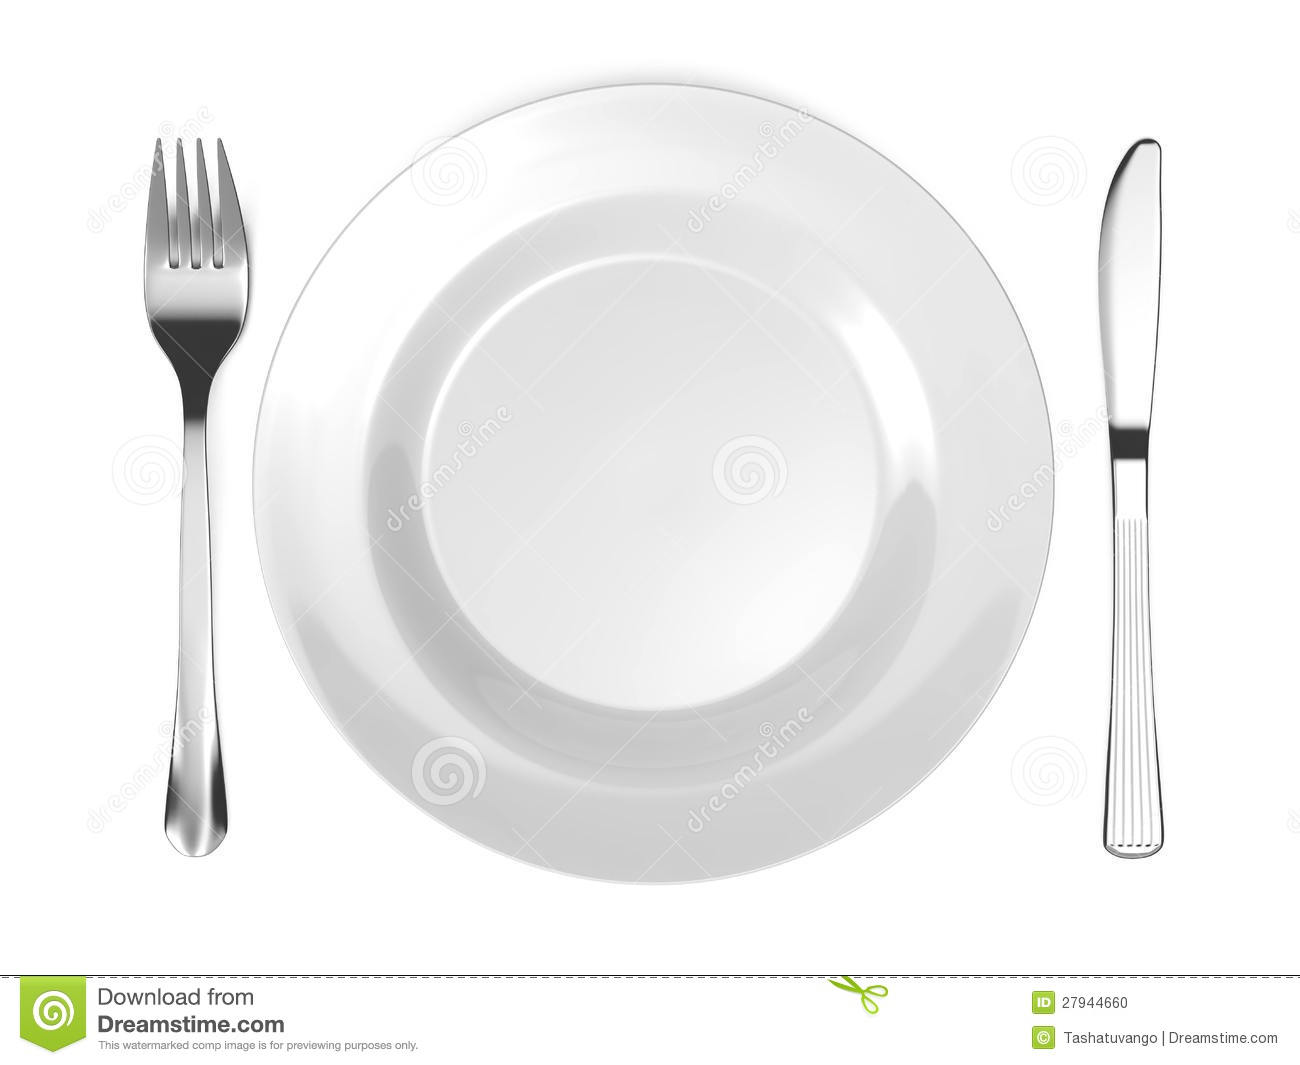 With Fork And Knife Isolated On White Background Mr No Pr No 2 517 2